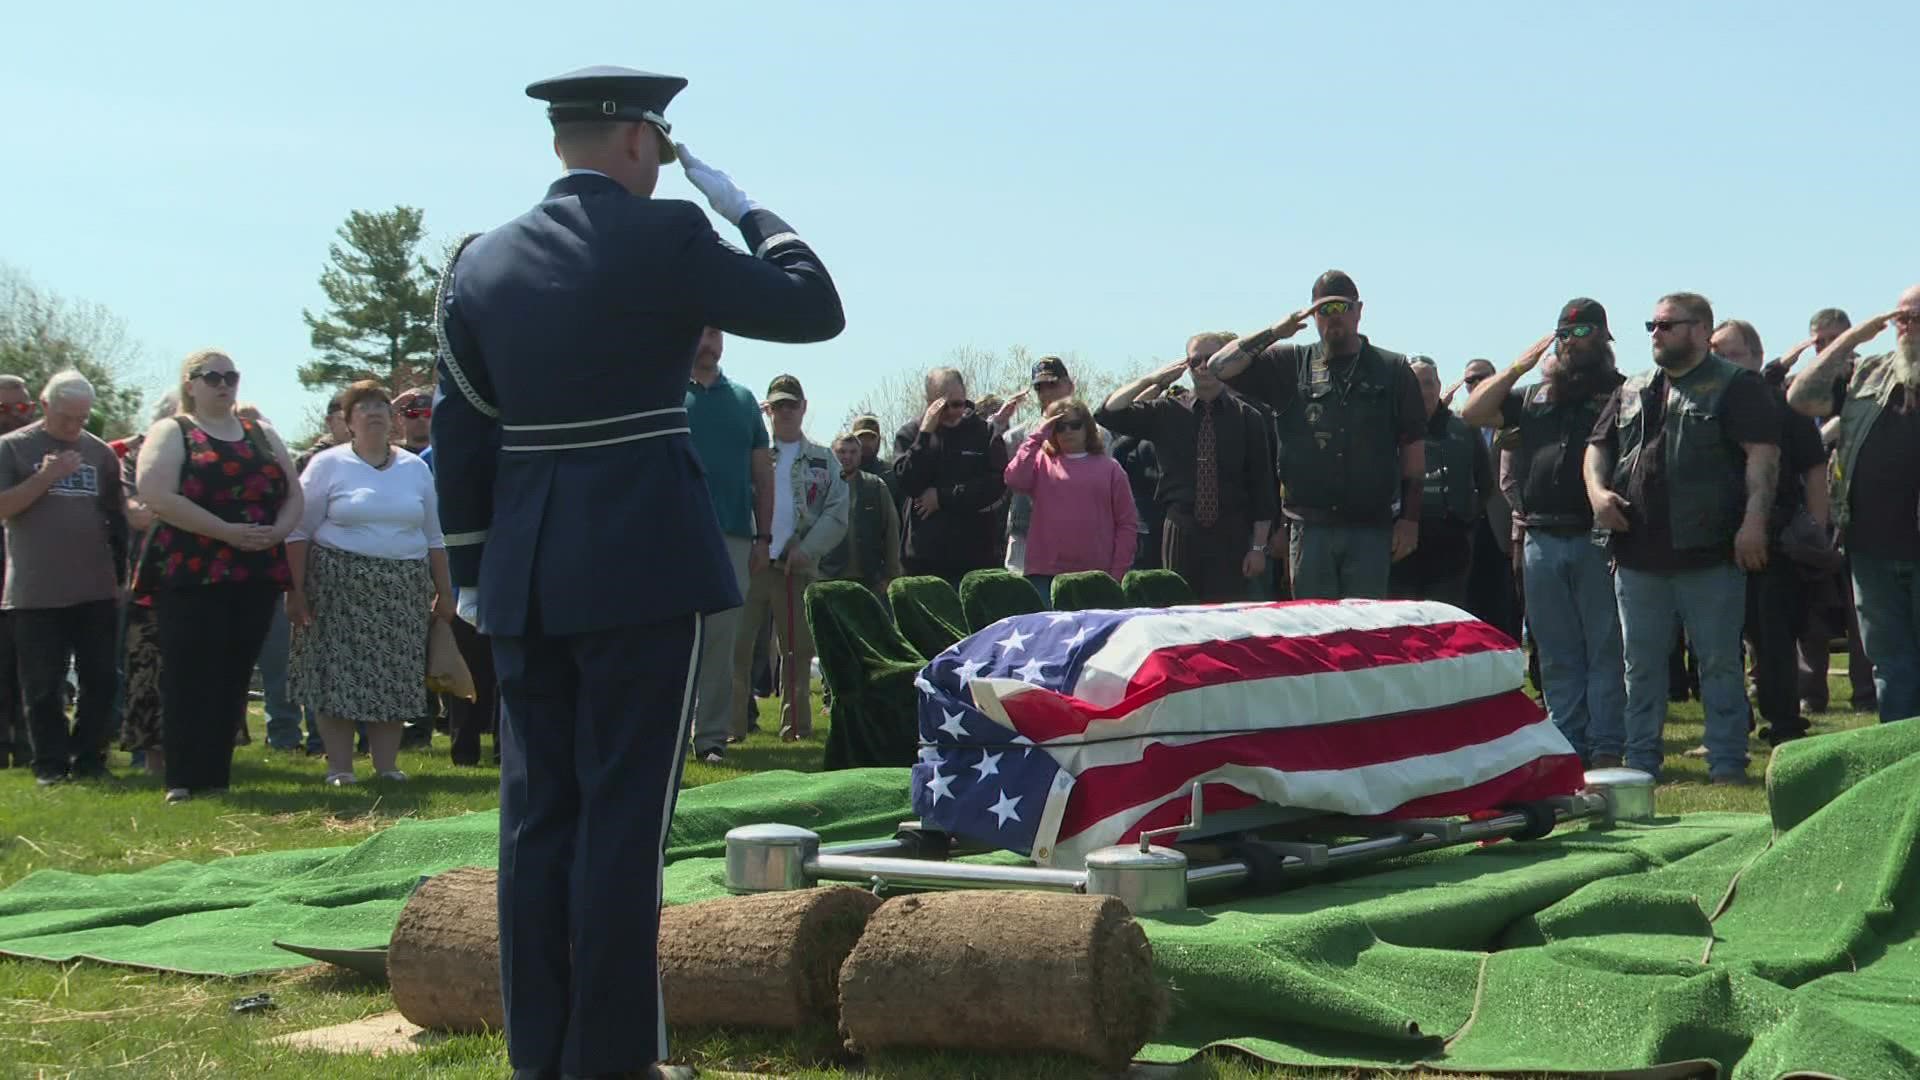 Mainers gather to support a veteran who thought he would have no one at his funeral service.